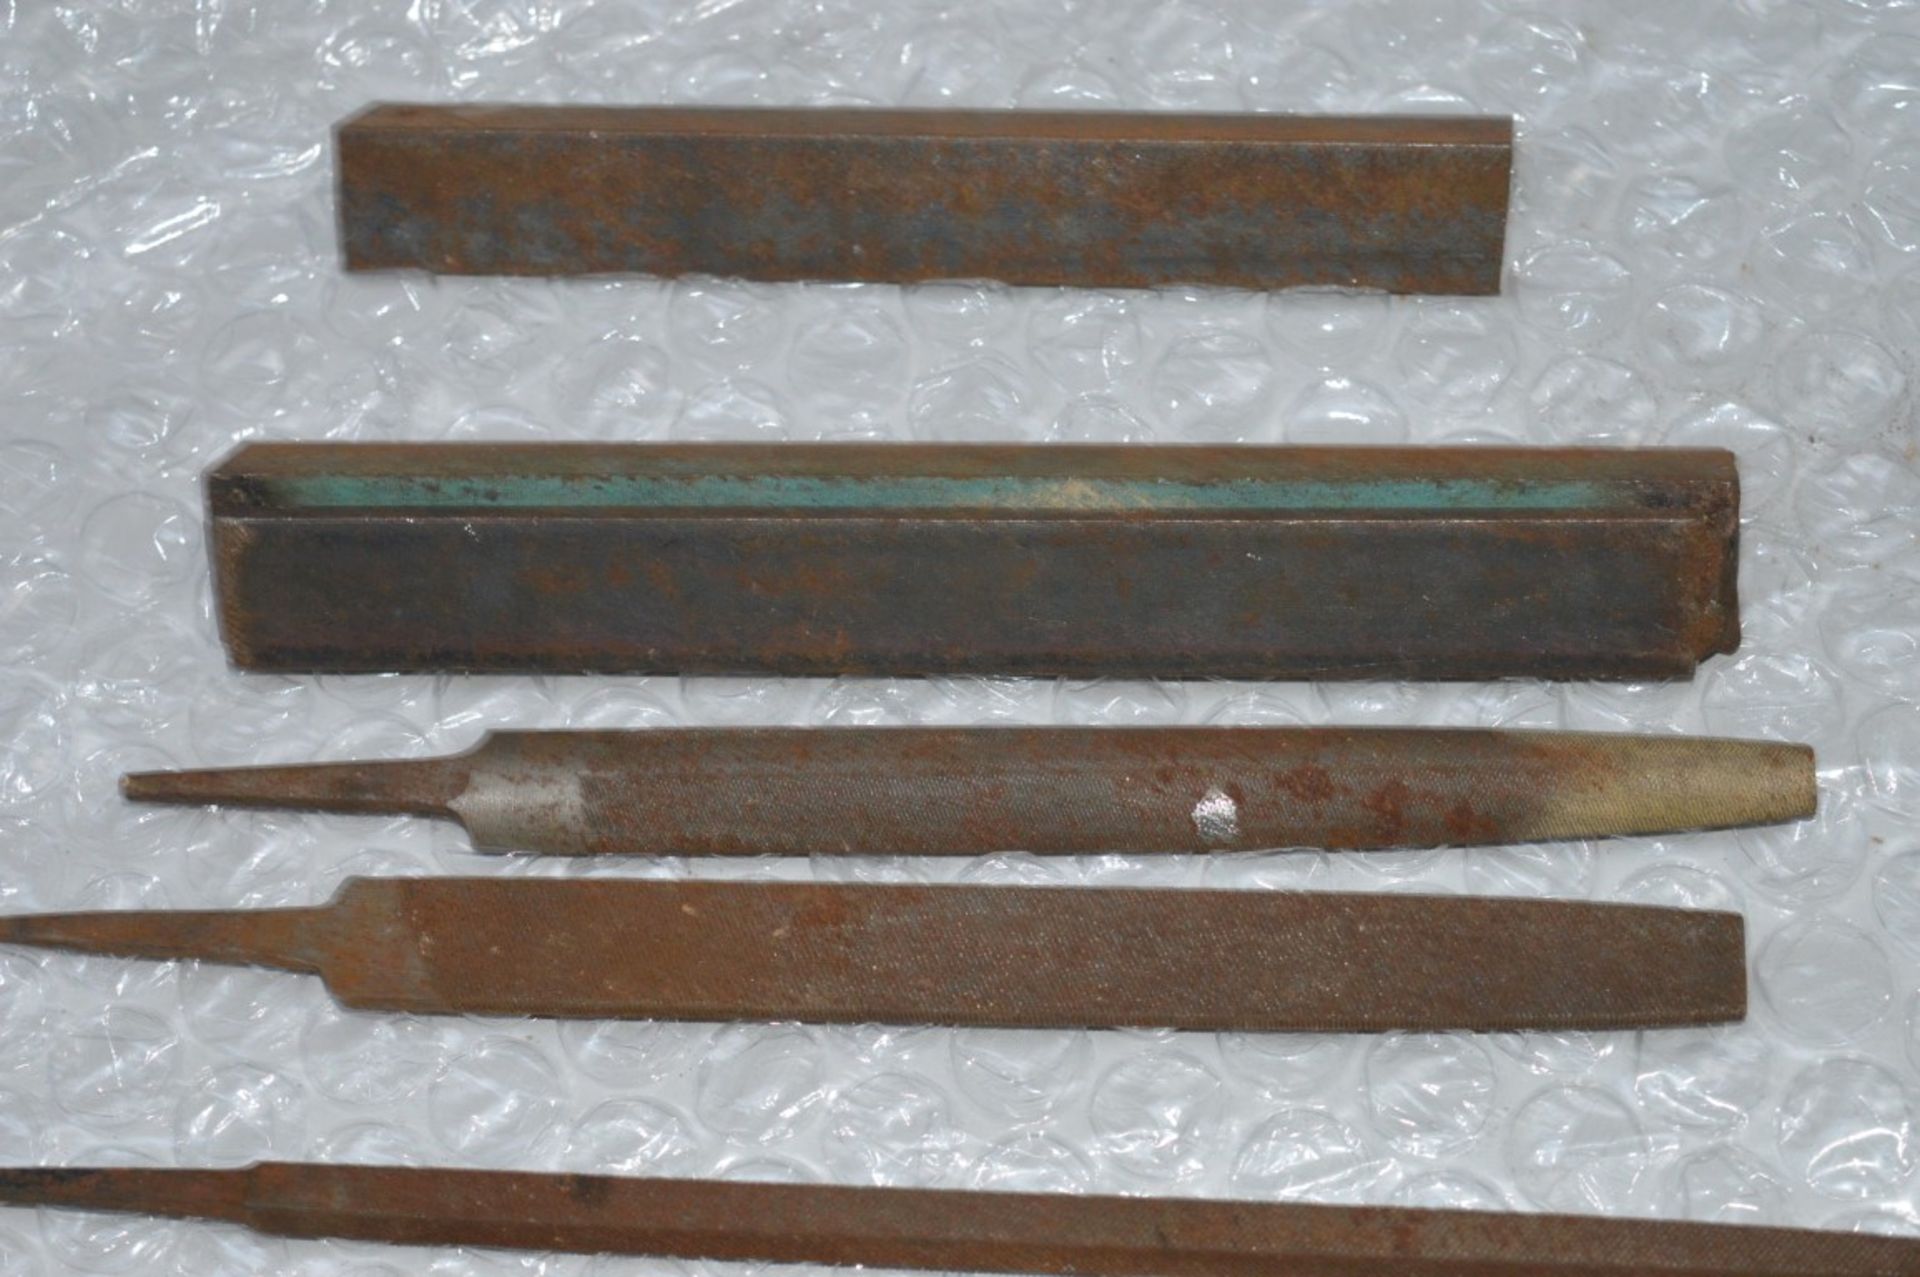 1 x Assorted Lot of Vintage Tools, Files, Rods and More - Includes More Than 30 Pieces Including - Image 21 of 31